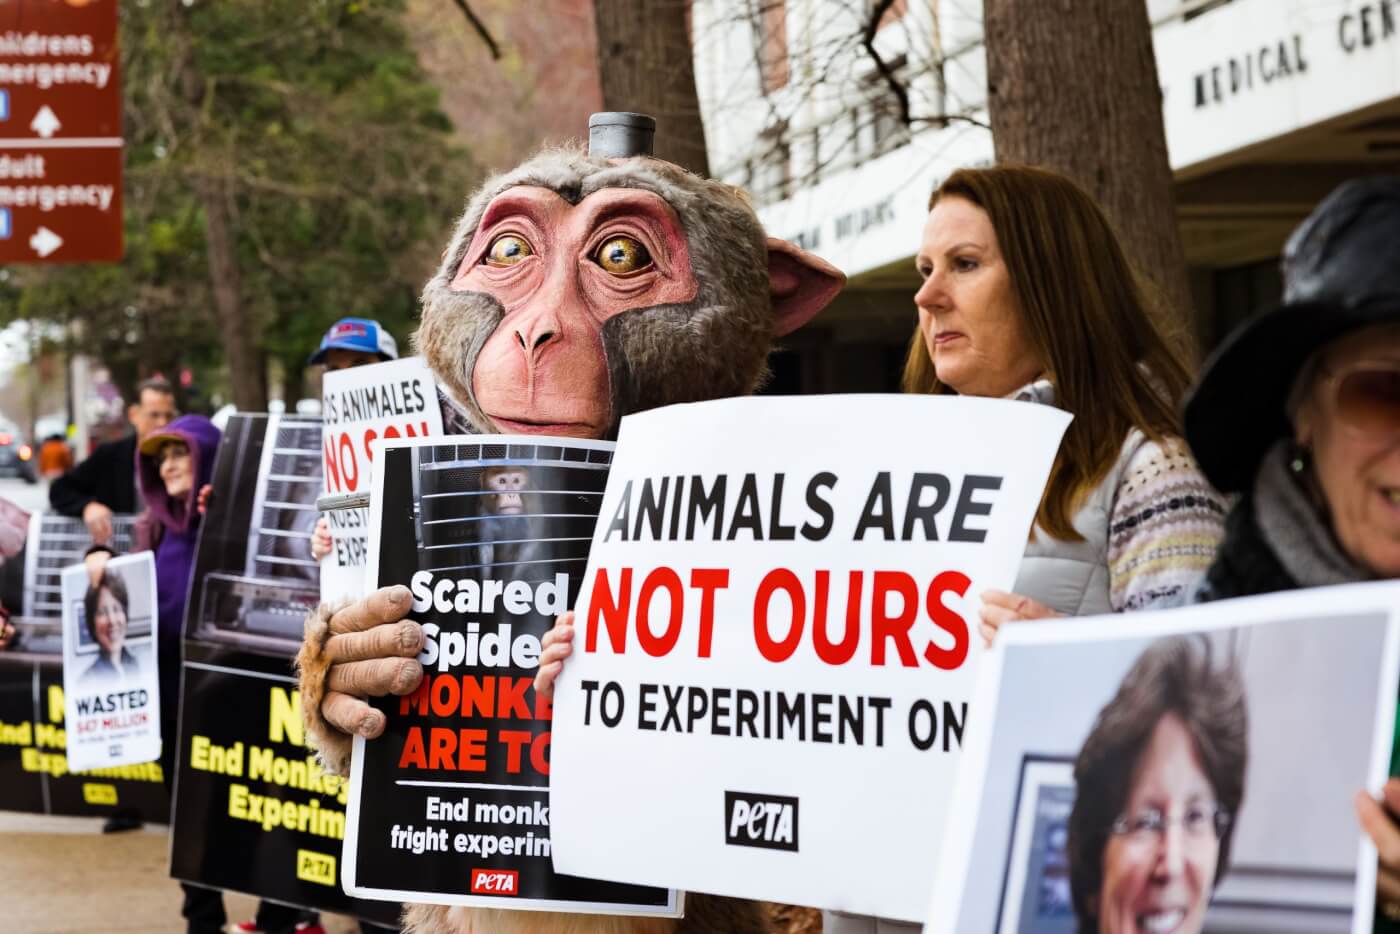 a monkey mascot in a row with other protestors all holding signs